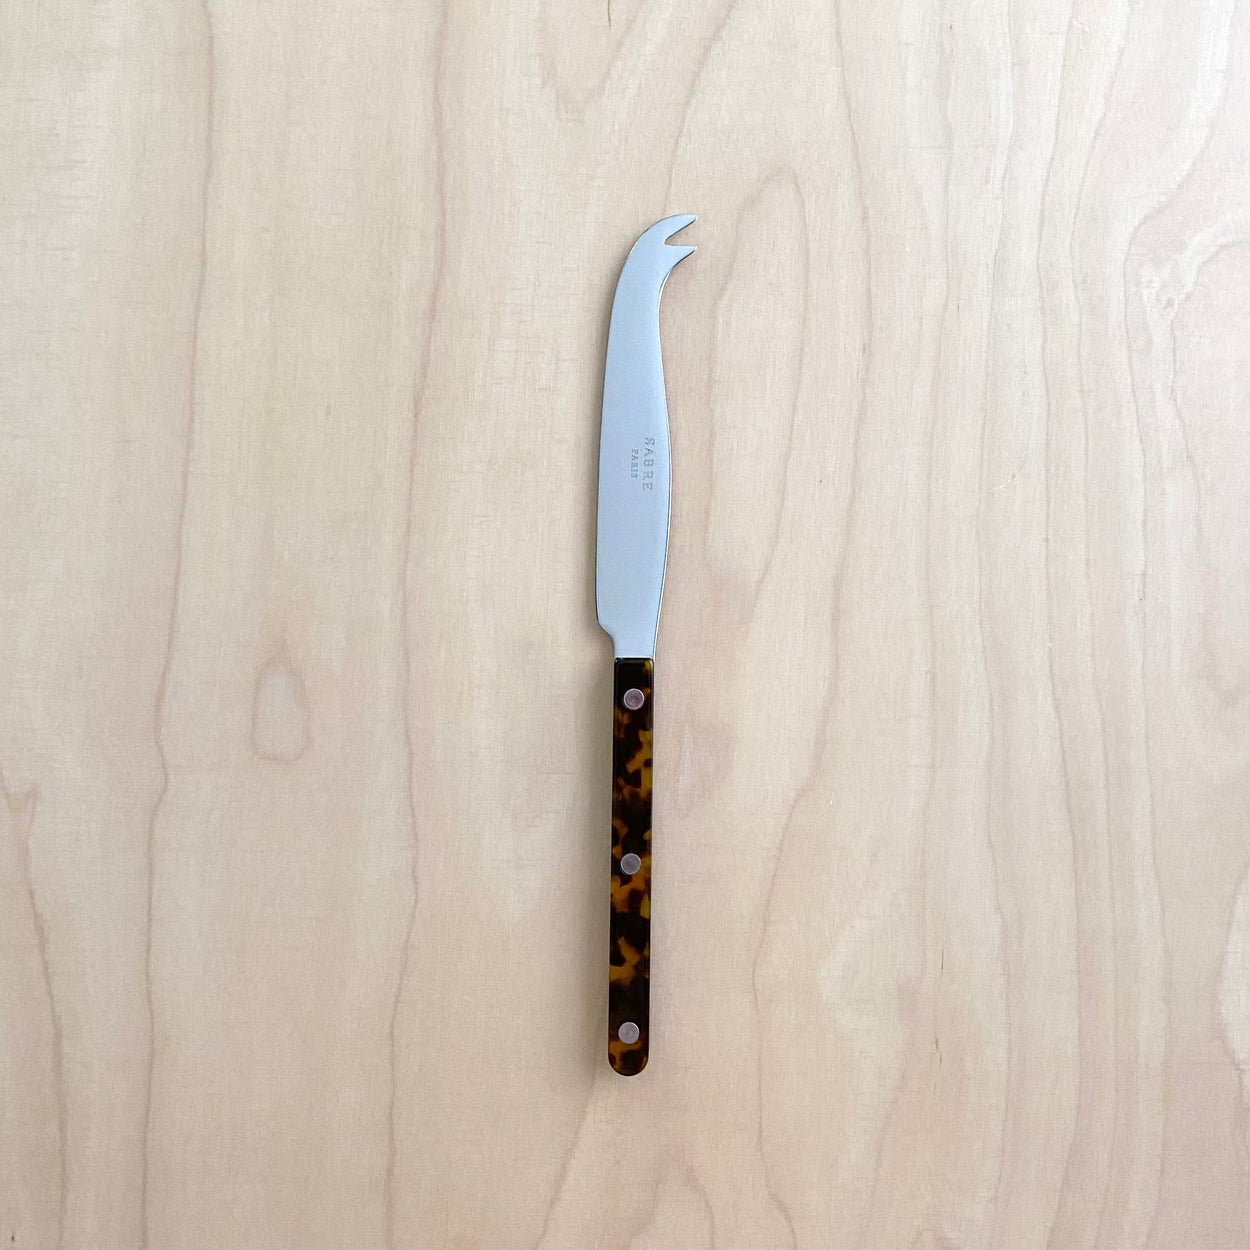 Sabre Bistrot Cheese Knife in Tortoise.